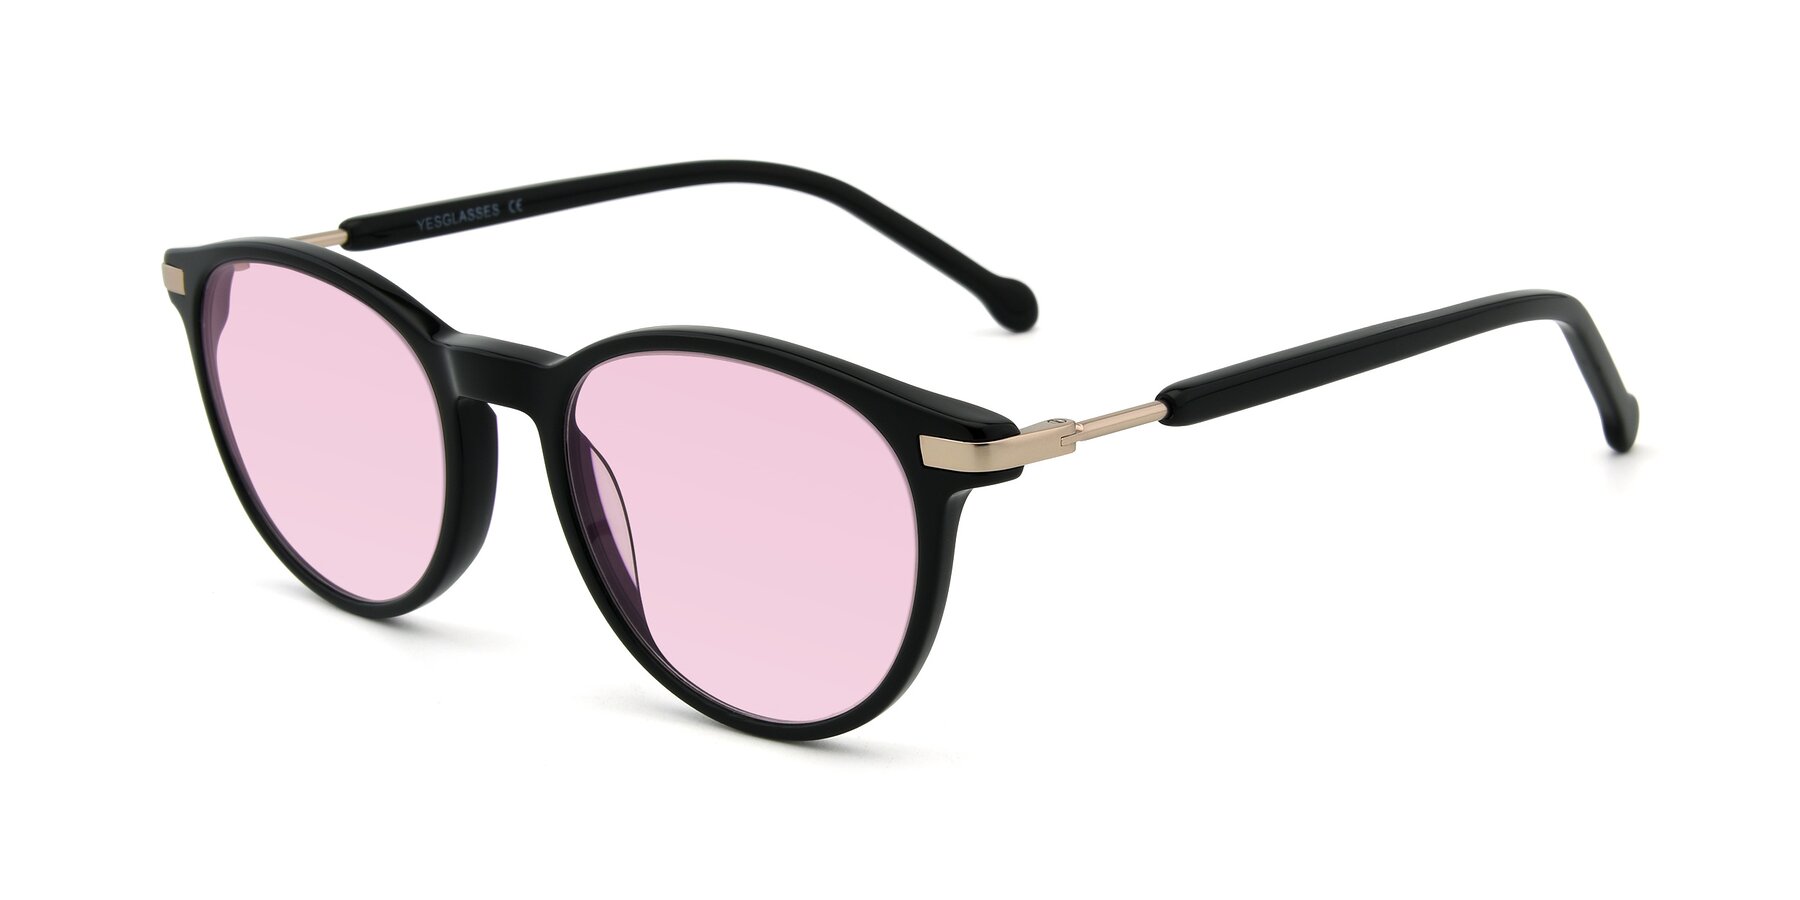 Angle of 17429 in Black with Light Pink Tinted Lenses